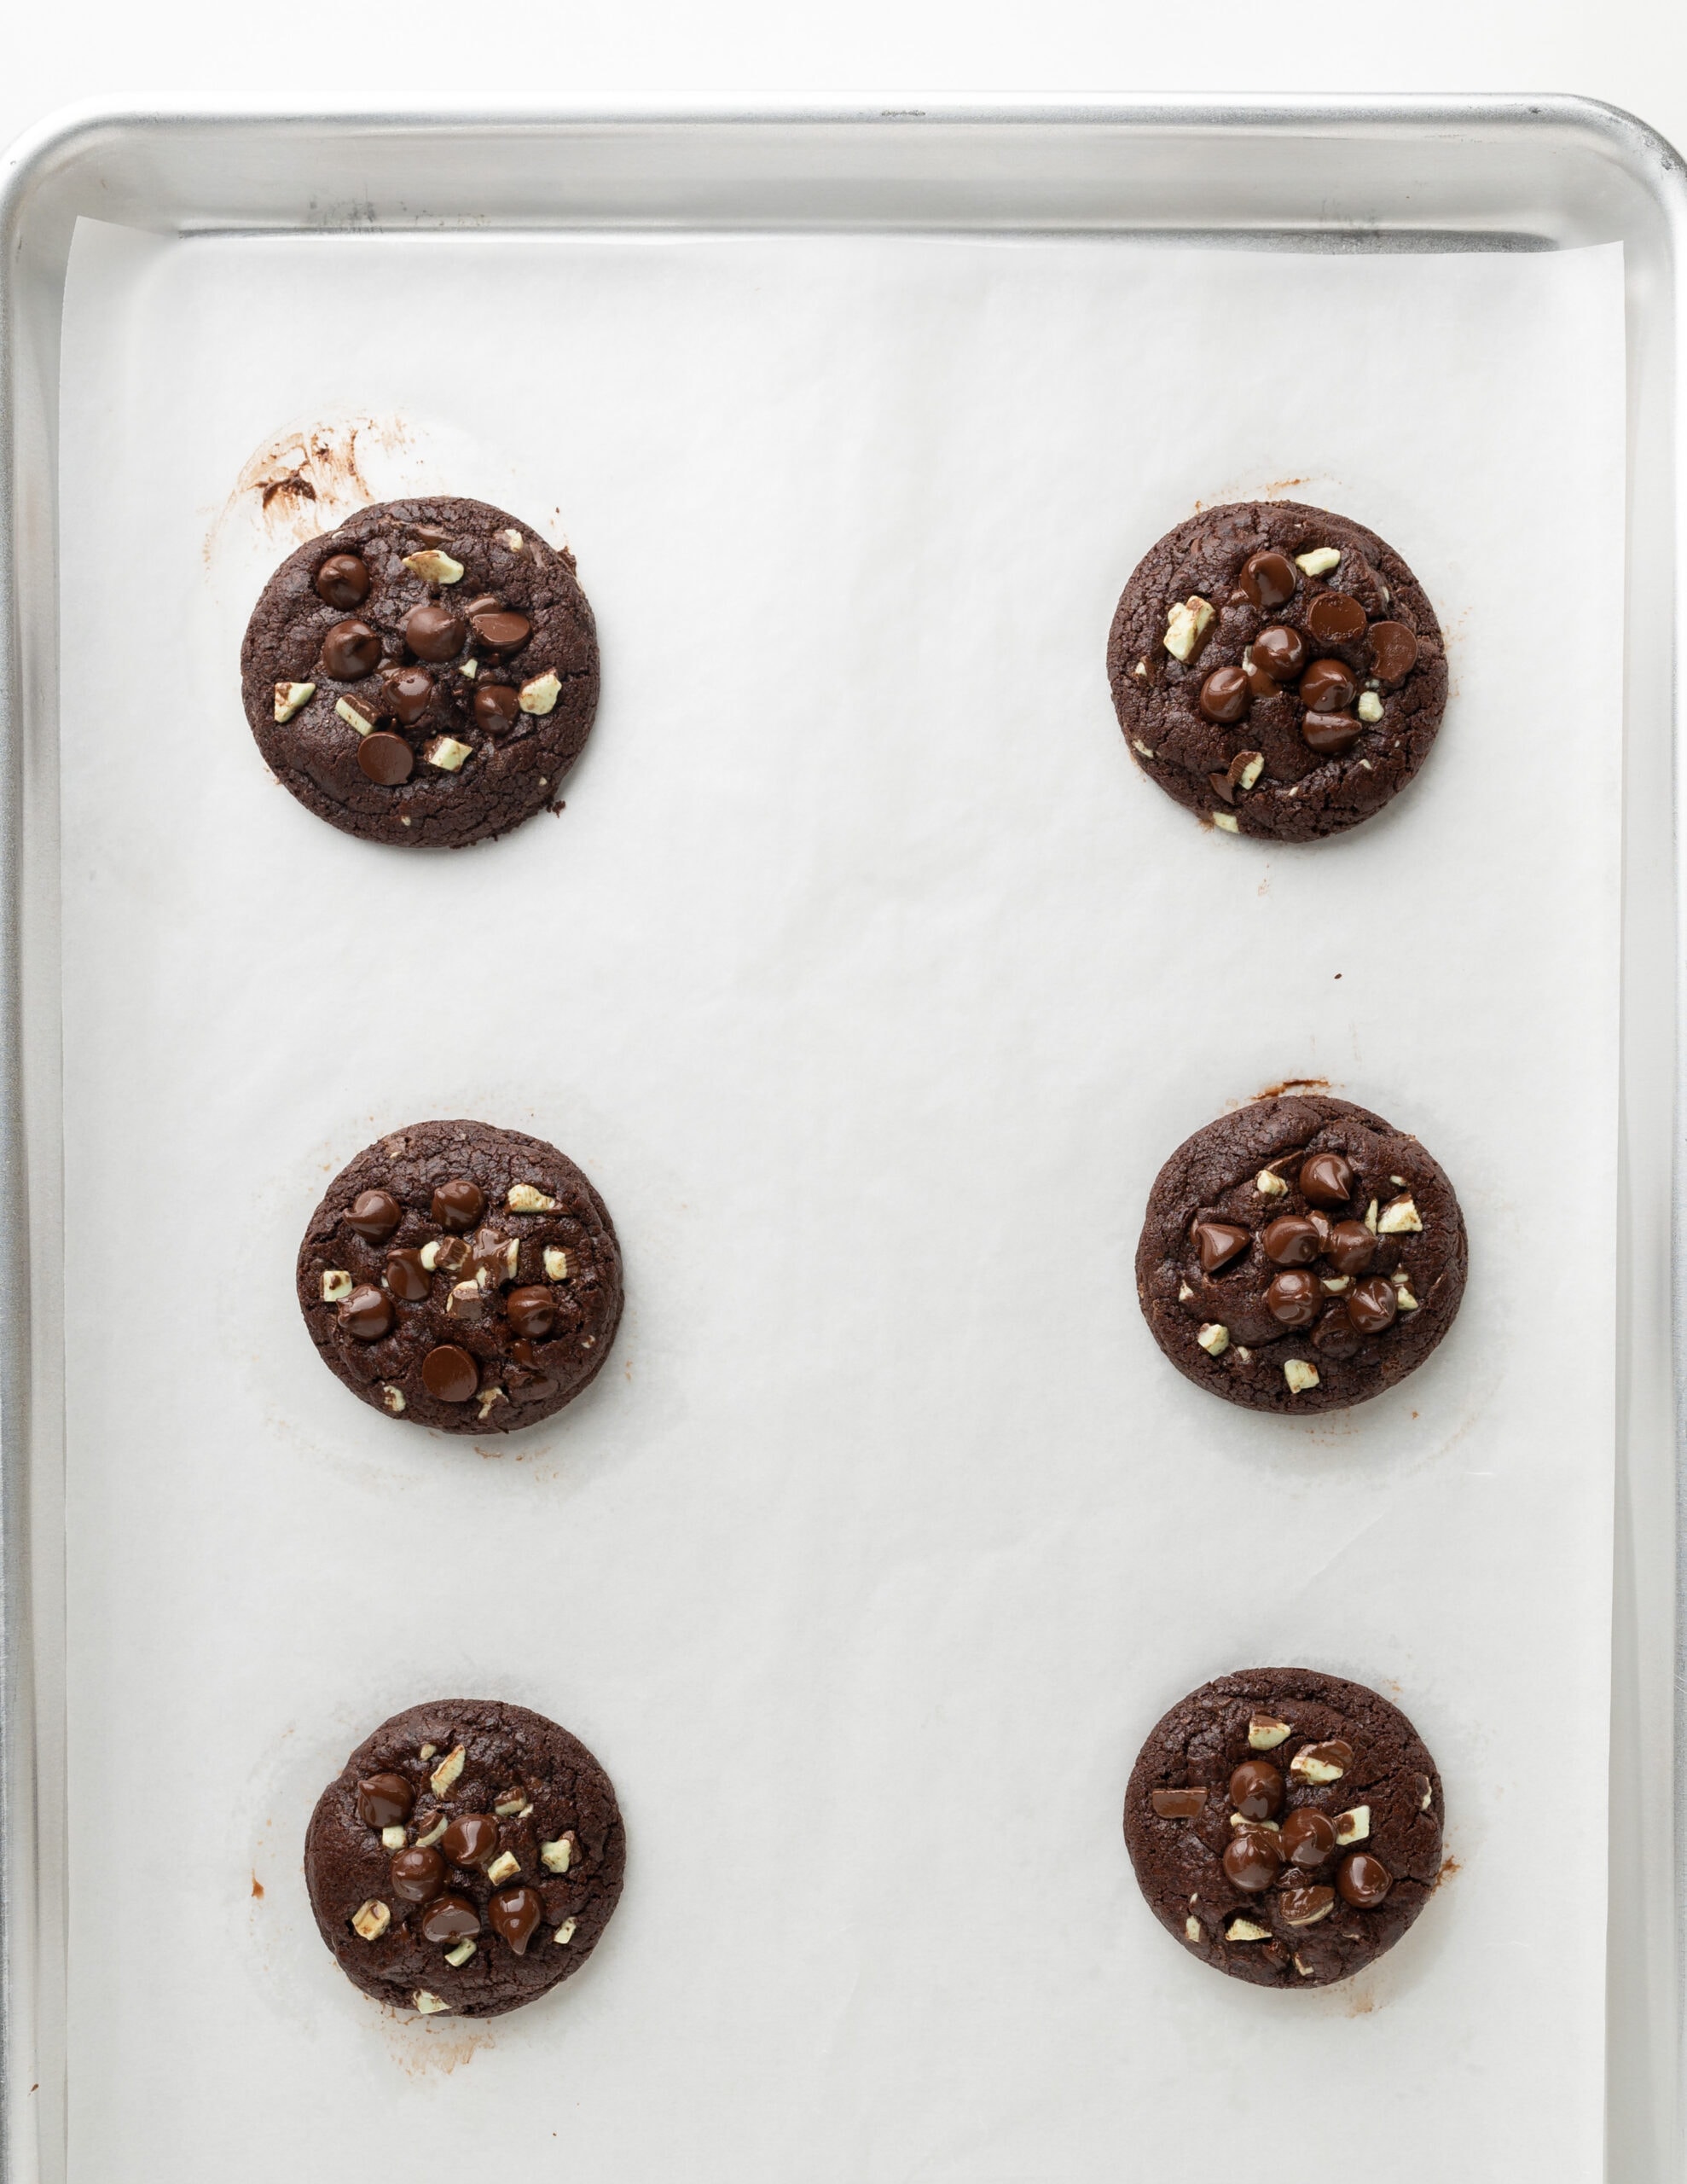 A large silver baking tray with freshly baked chocolate mint cookies right out of the oven with melty chocolate on top. 